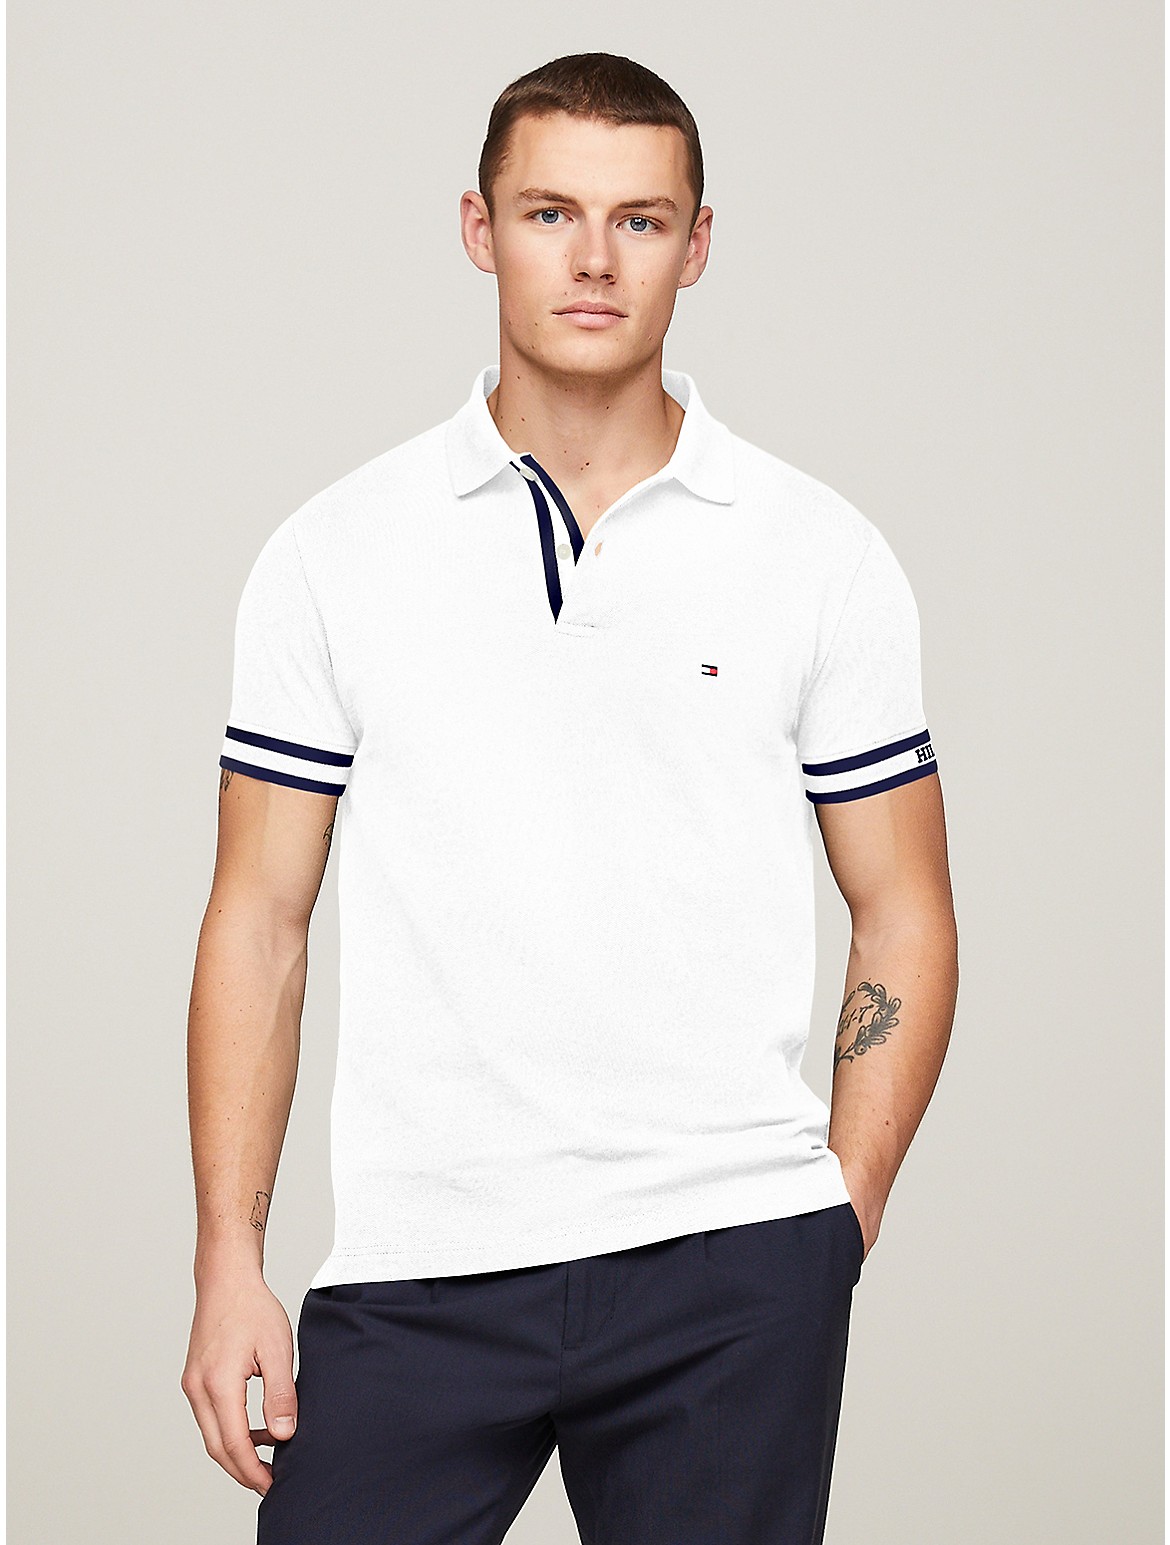 Tommy Hilfiger Men's Slim Fit Monotype Cuff Polo